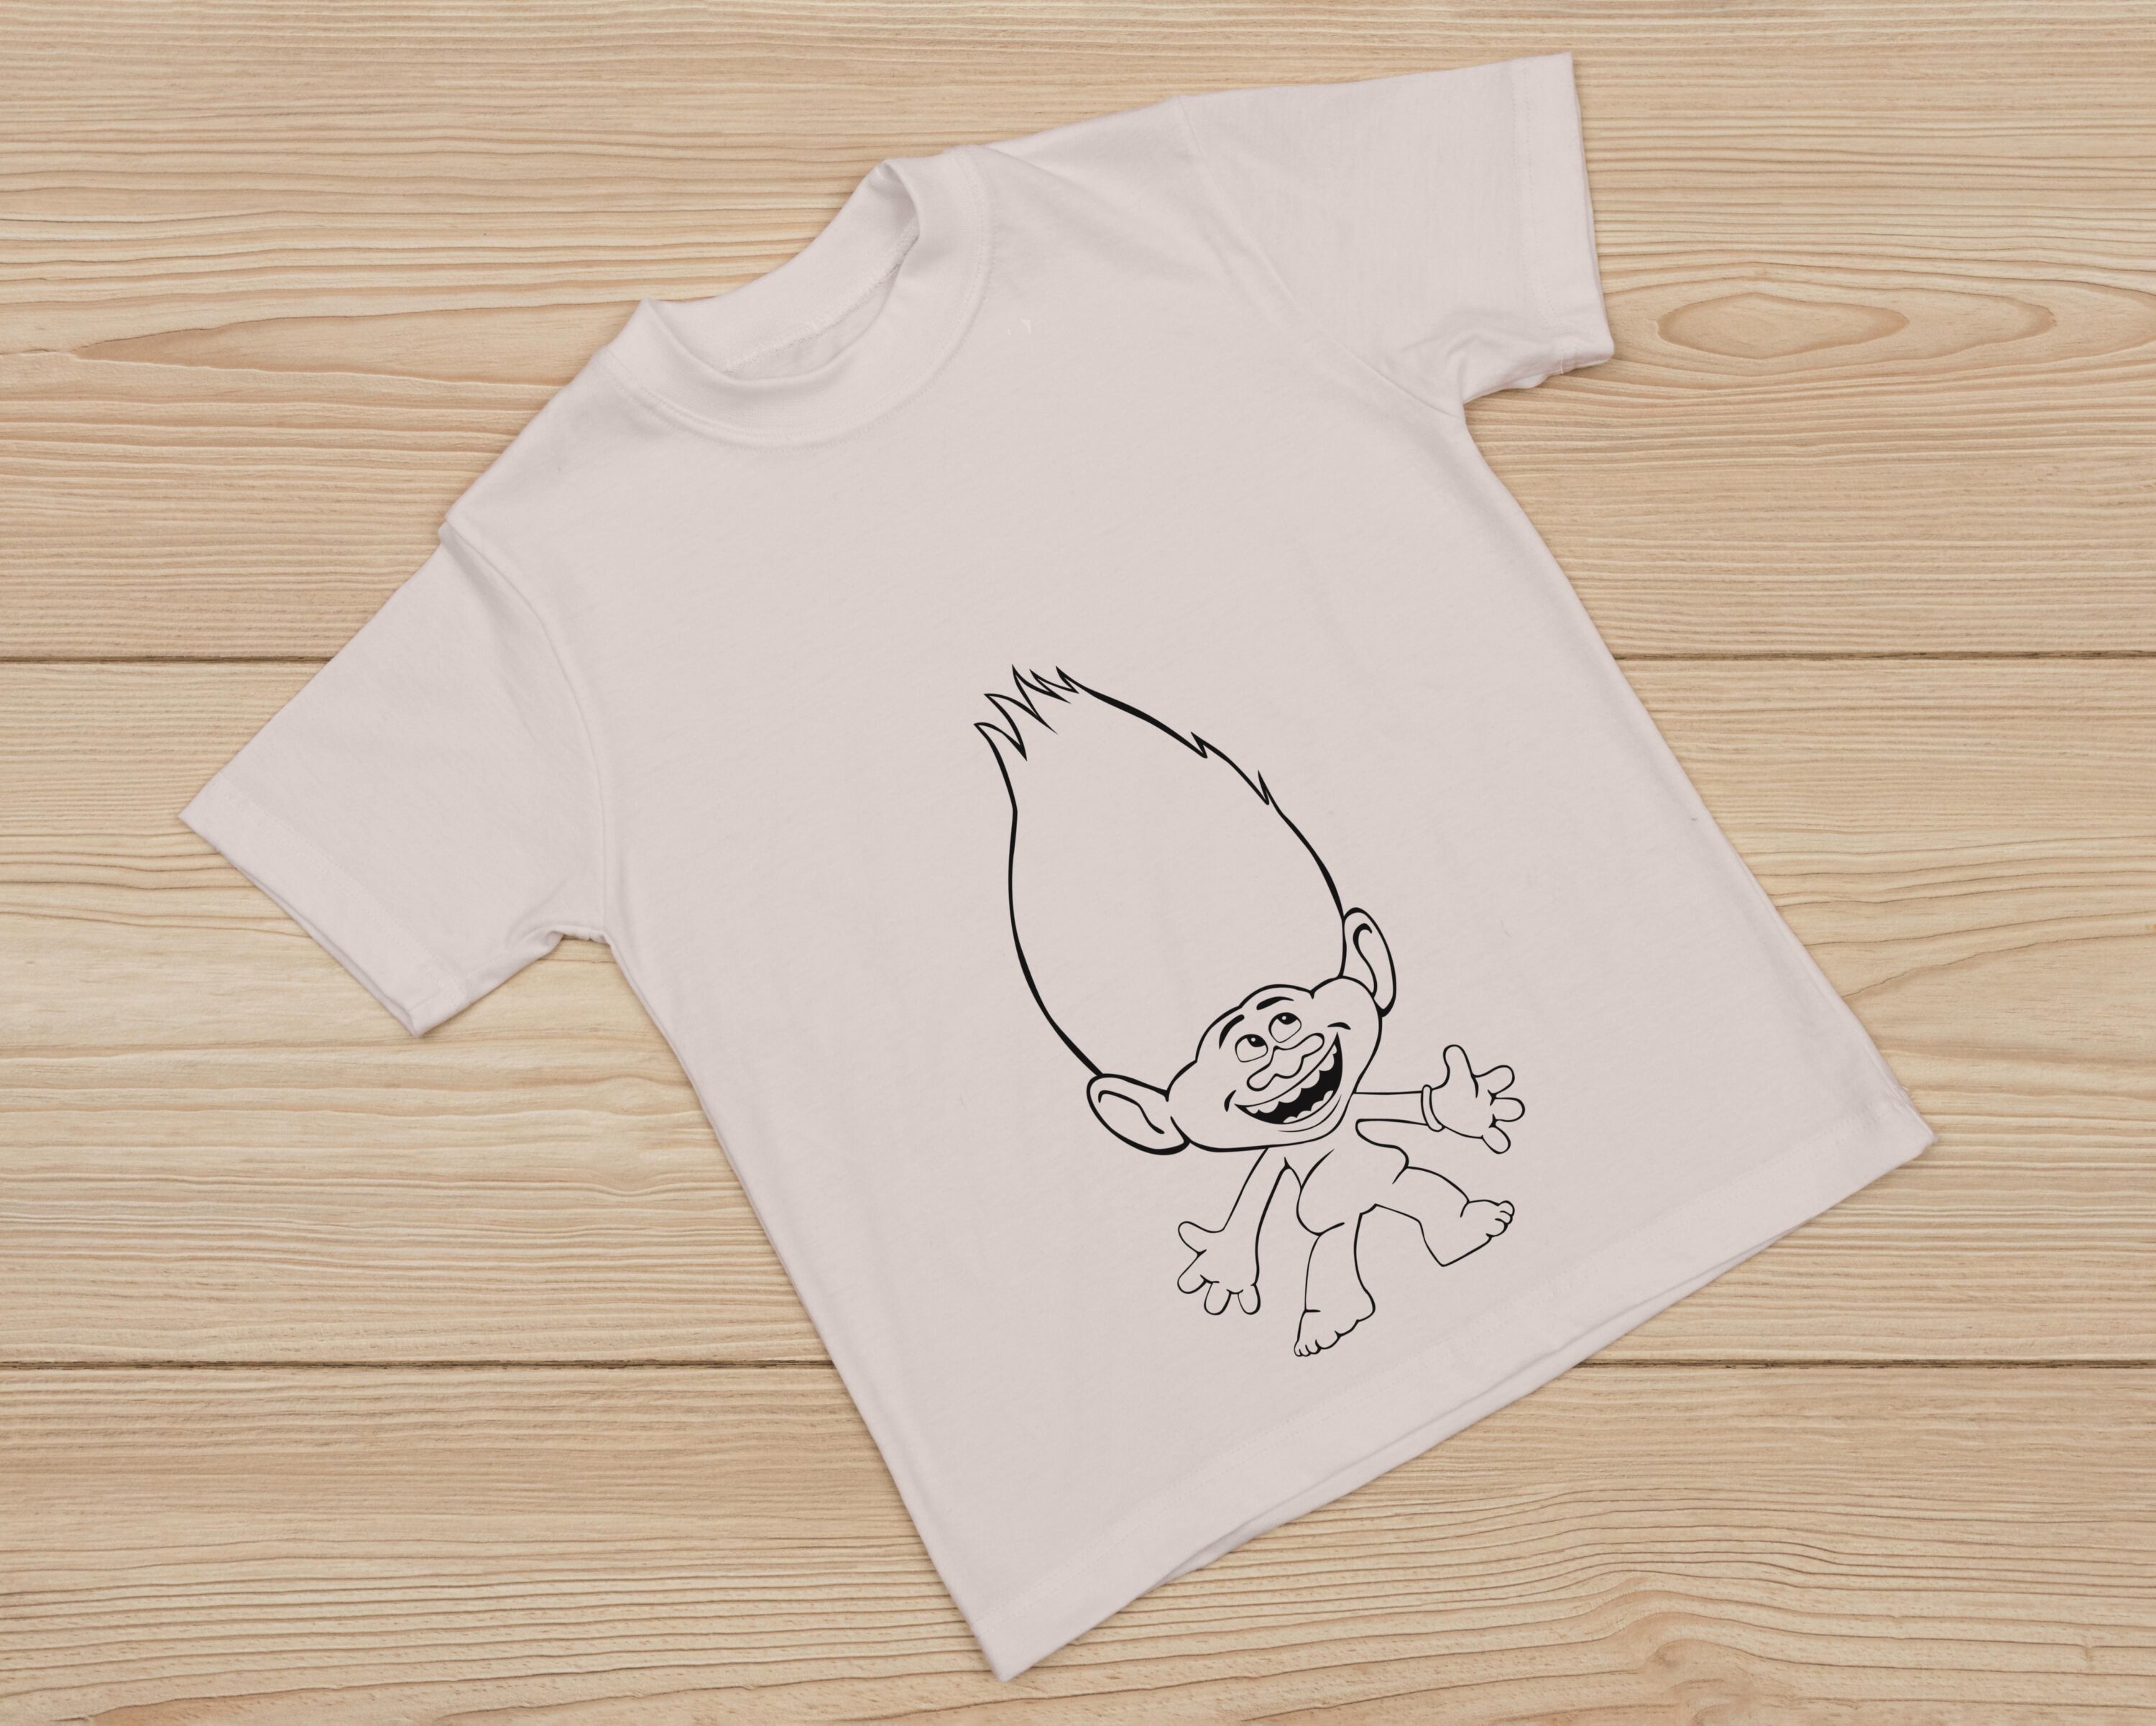 White T-shirt with a black outline of a cartoon character - Guy Diamond.